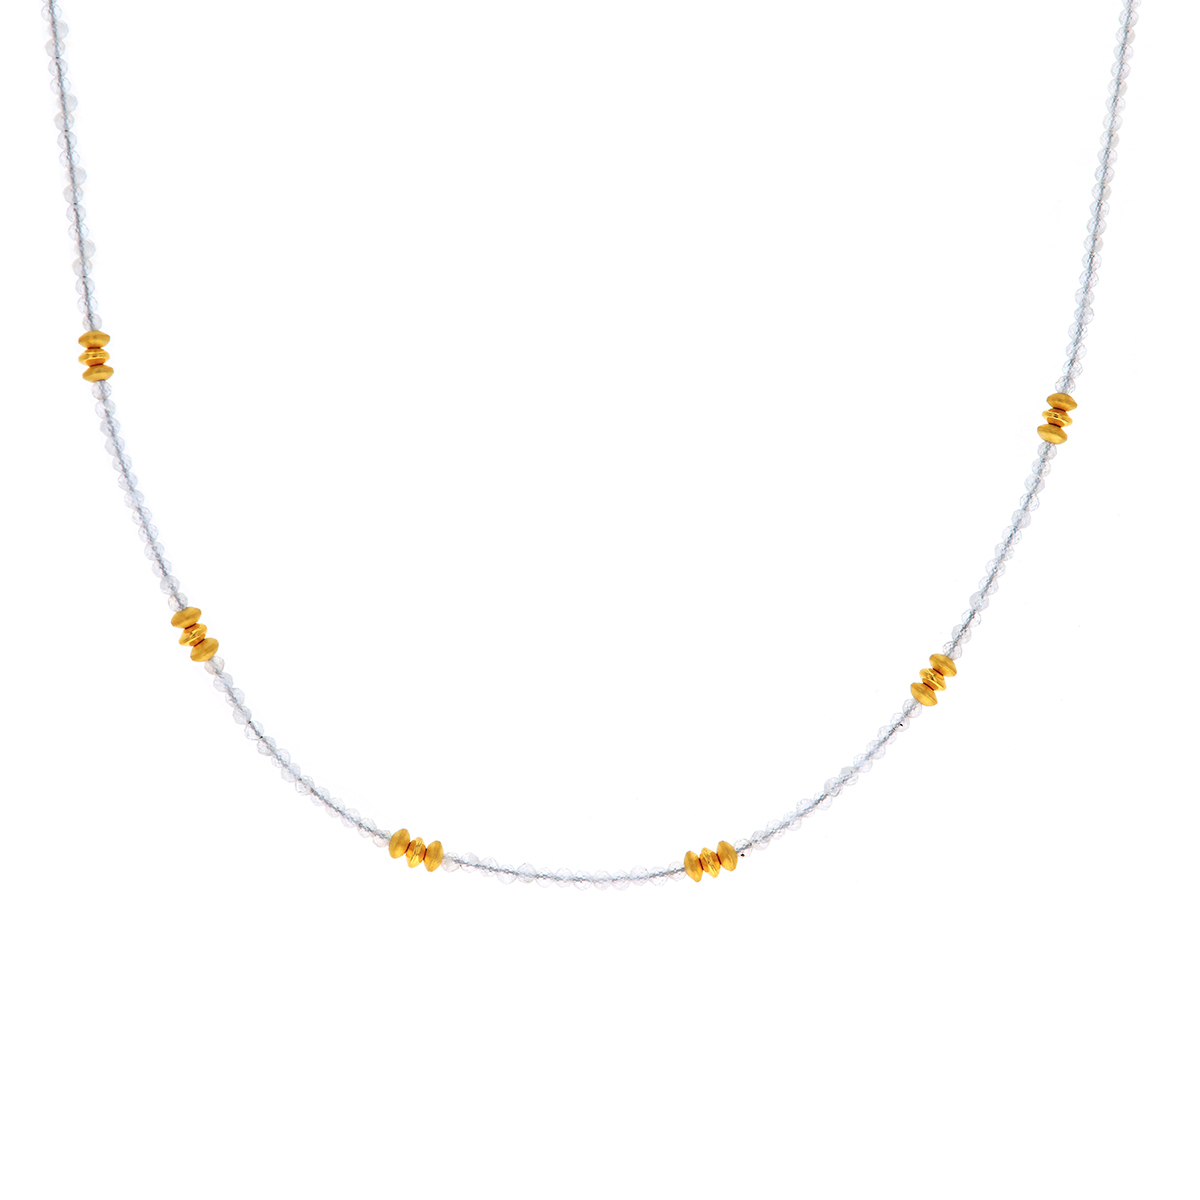 24K Gold Plated Sterling Silver Moonstone Bead Necklace